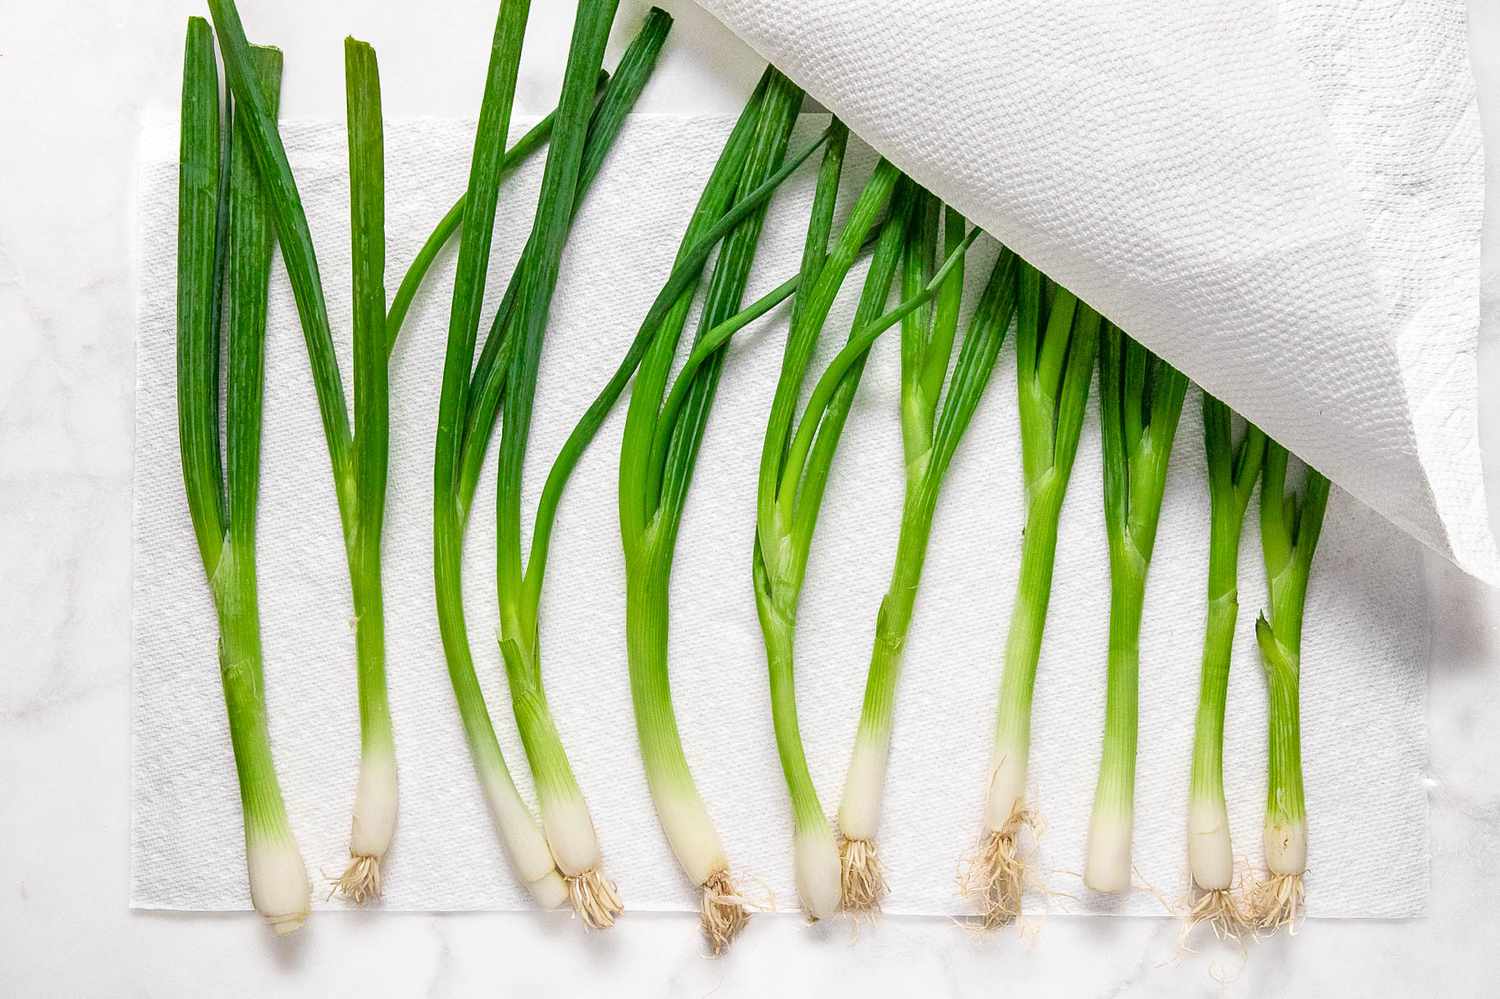 How To Store Bunching Onions